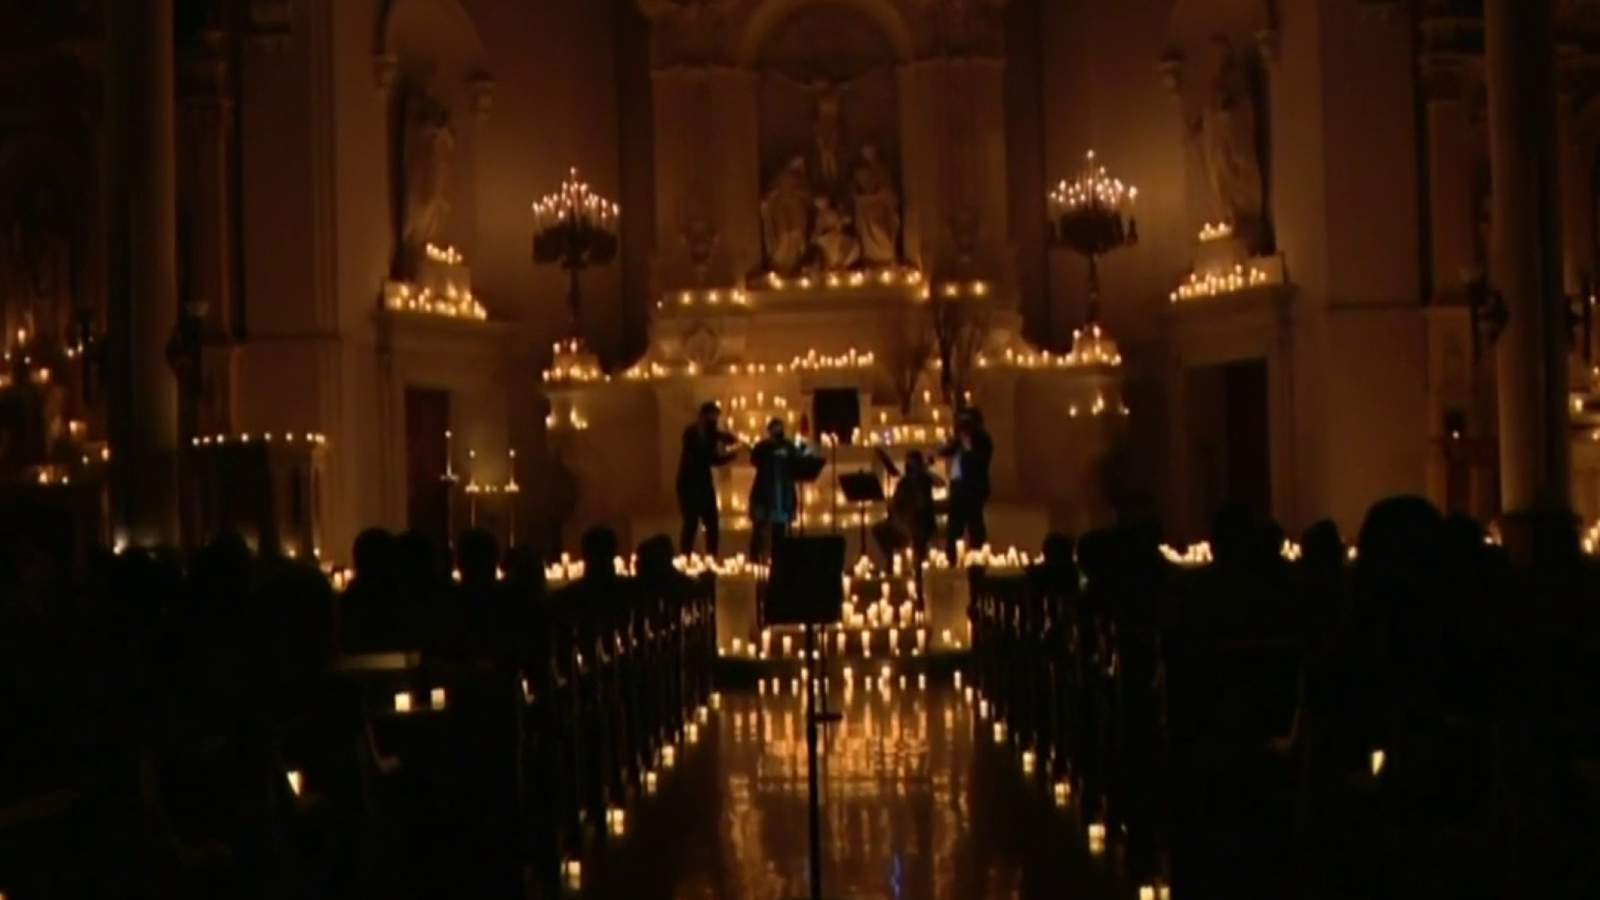 Candlelight concerts hosted in Downtown Detroit